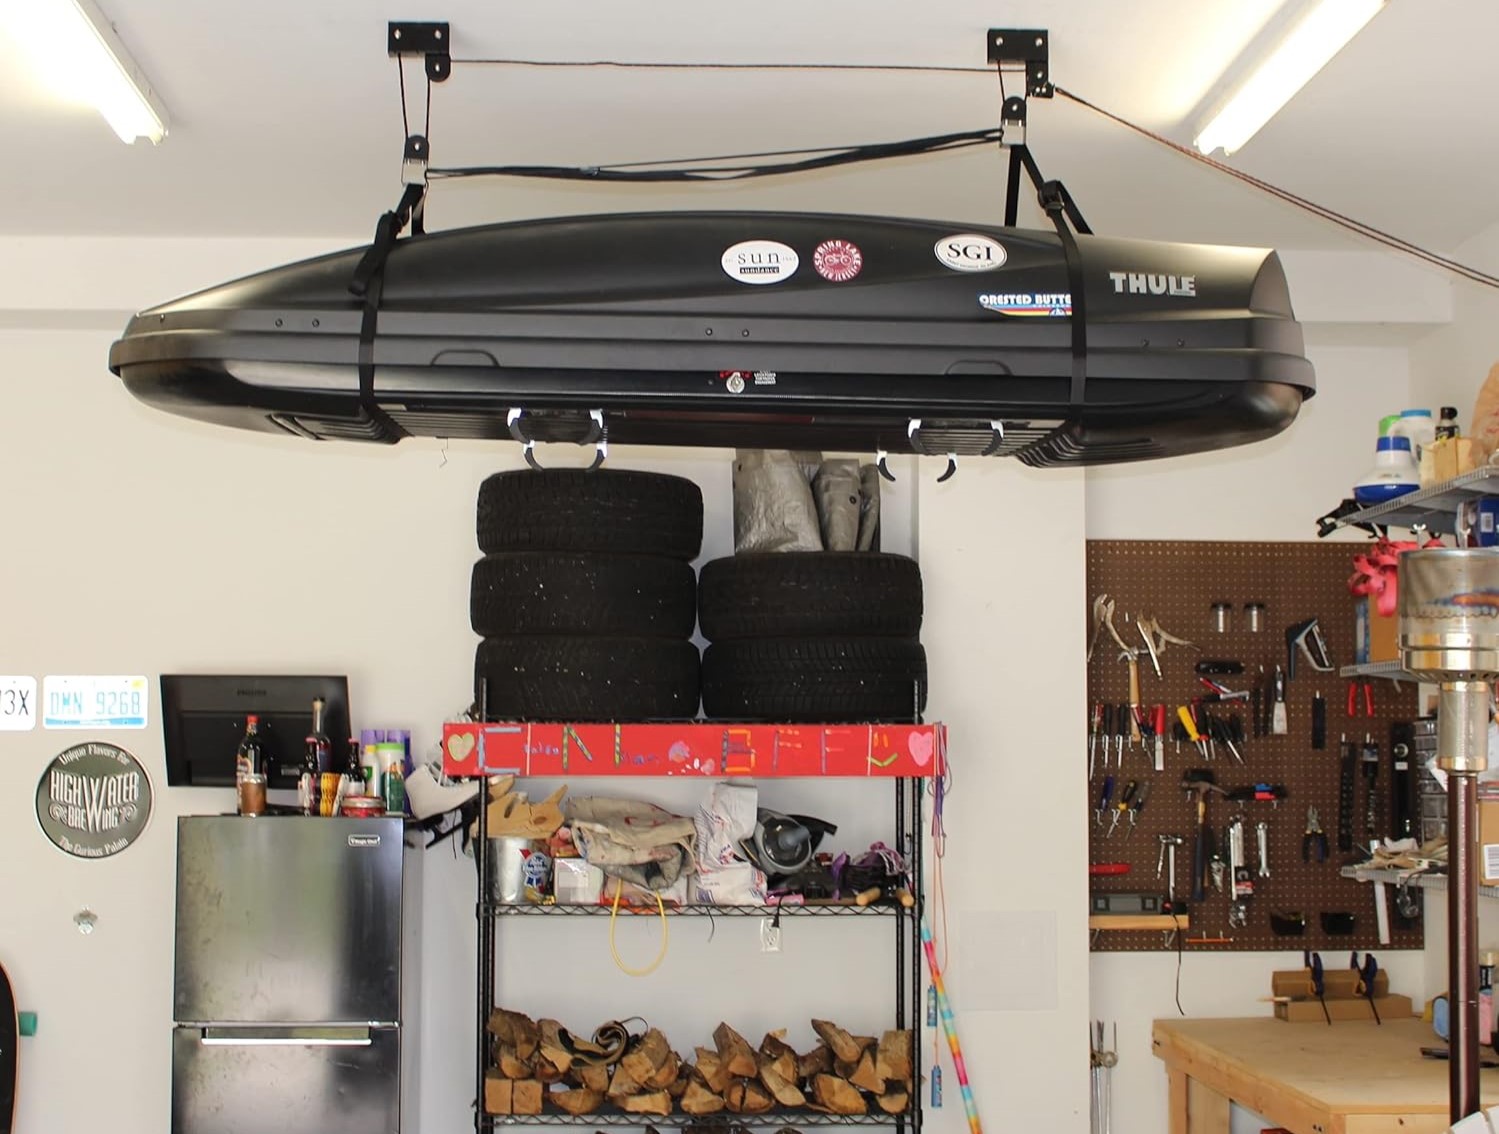 How To Store Cargo Box In Garage